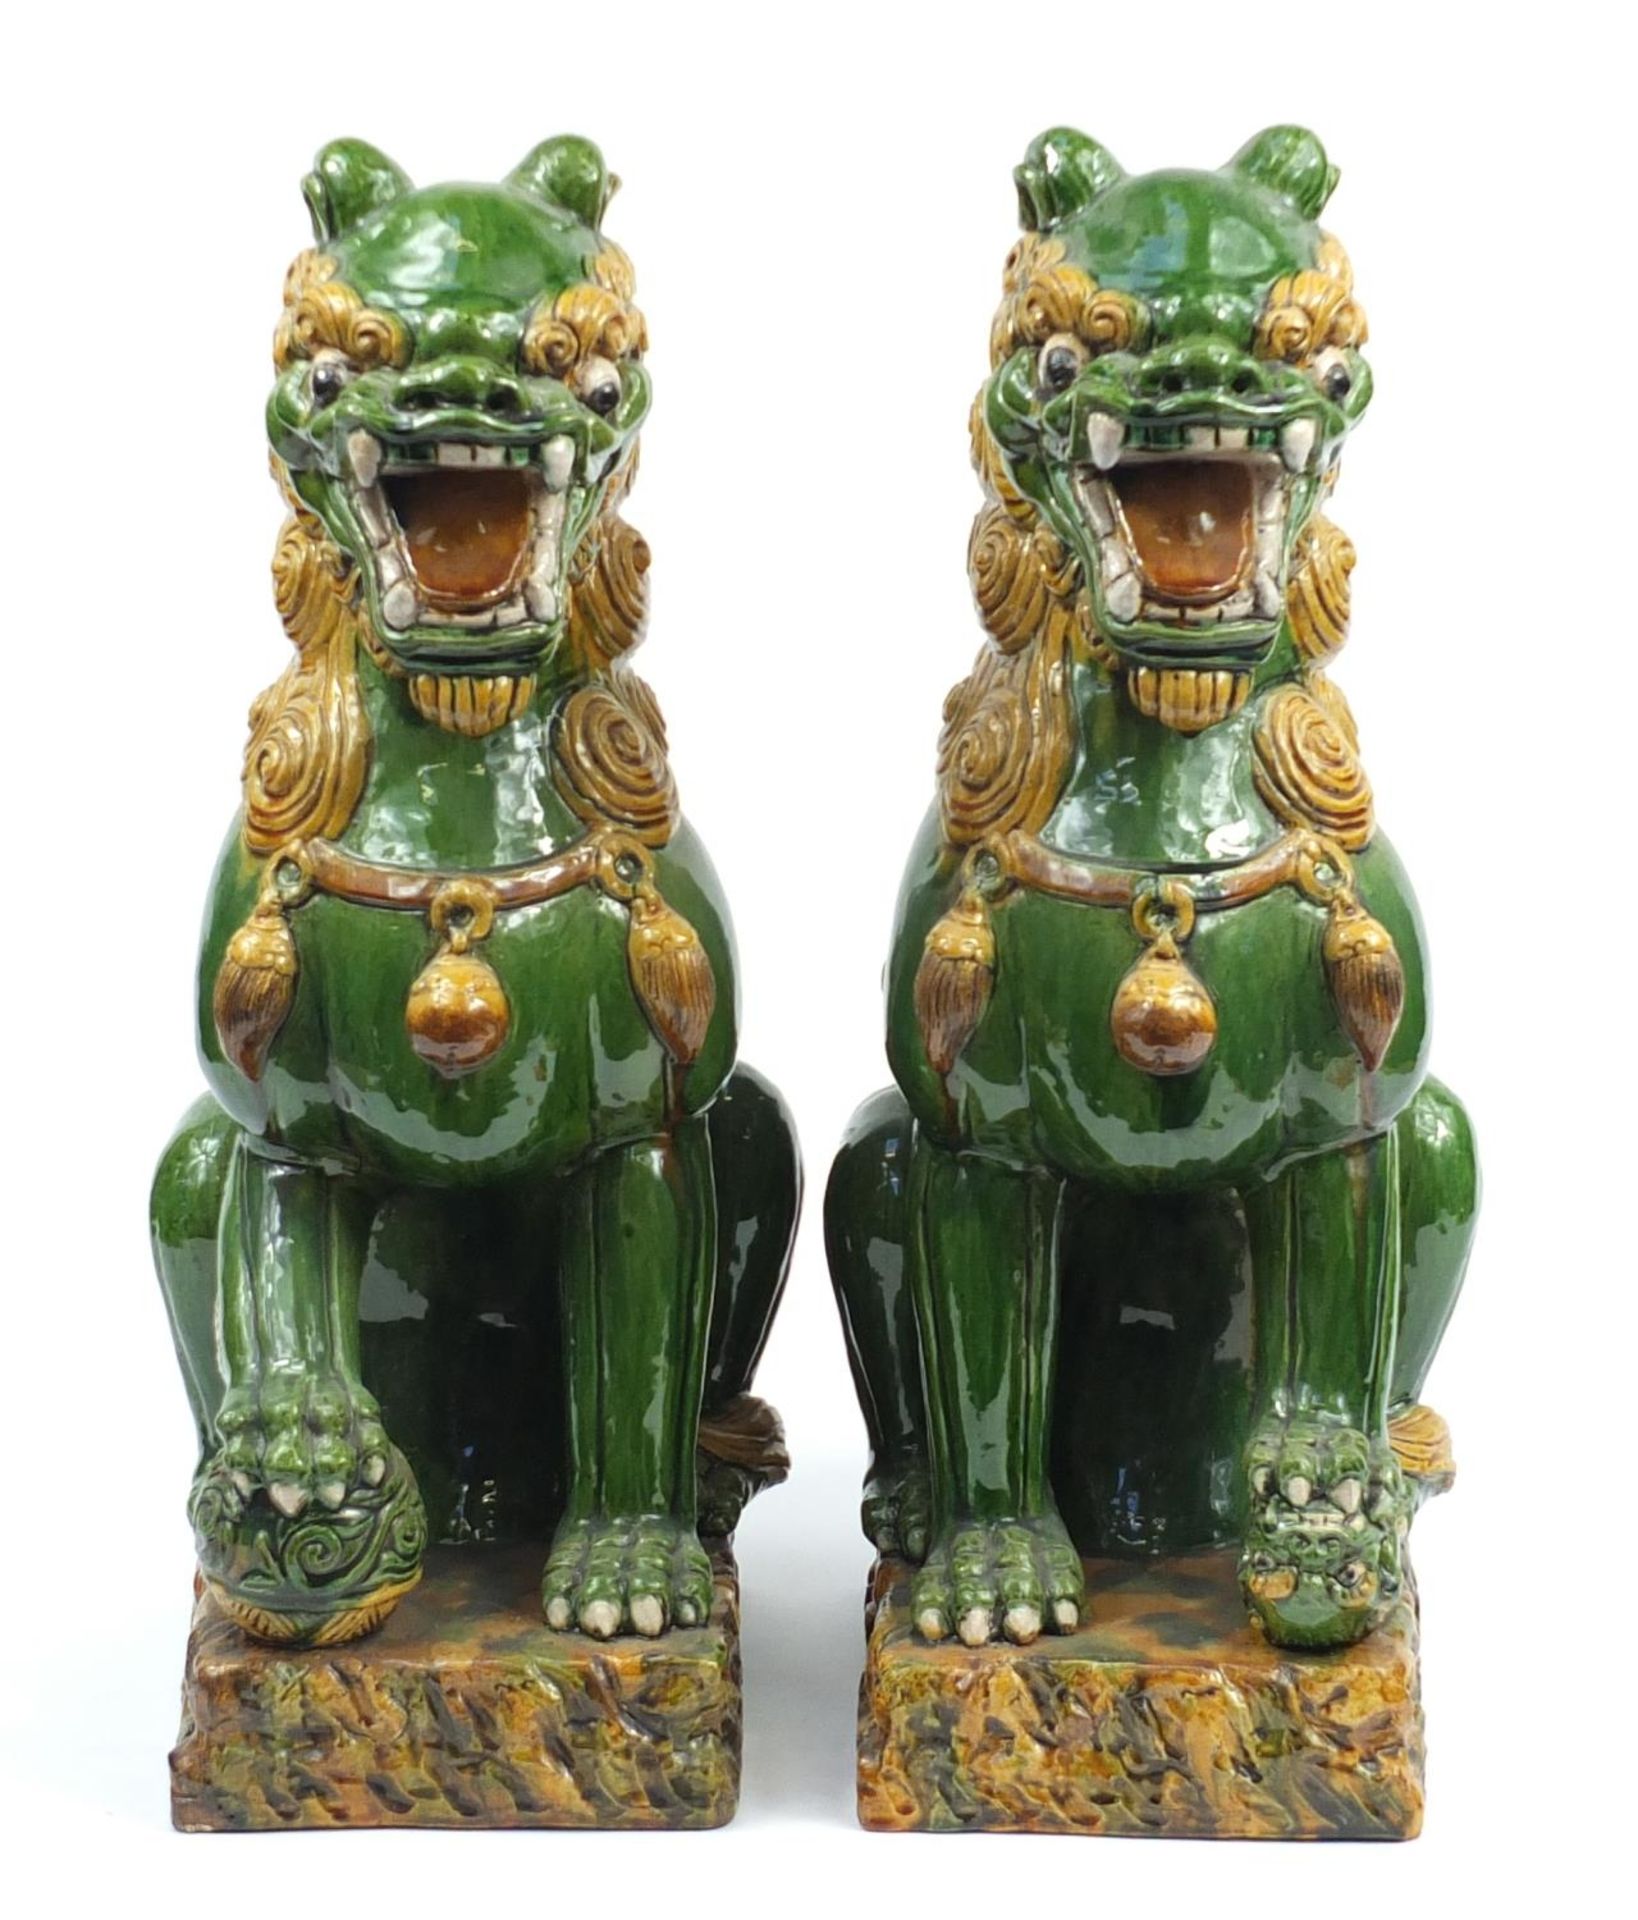 Large pair of Chinese floor standing pottery seated lions having a sancai type glaze, each 59cm high - Image 2 of 7